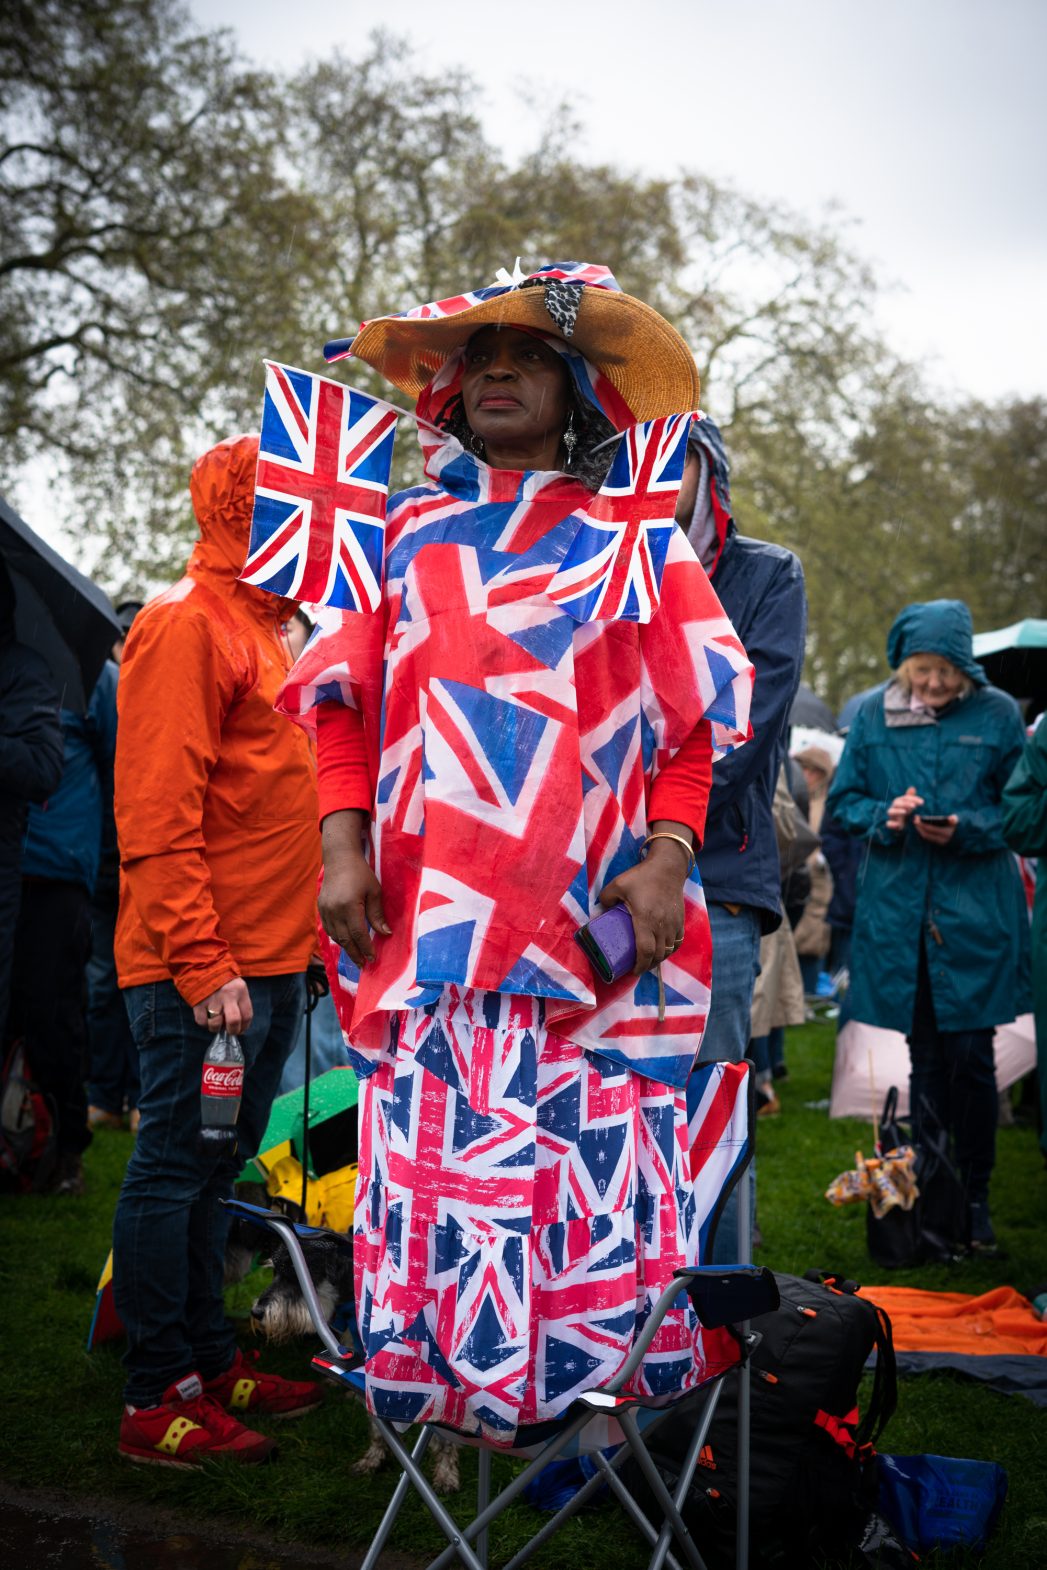 A reveller wearing a dress made from small Union Jack flags